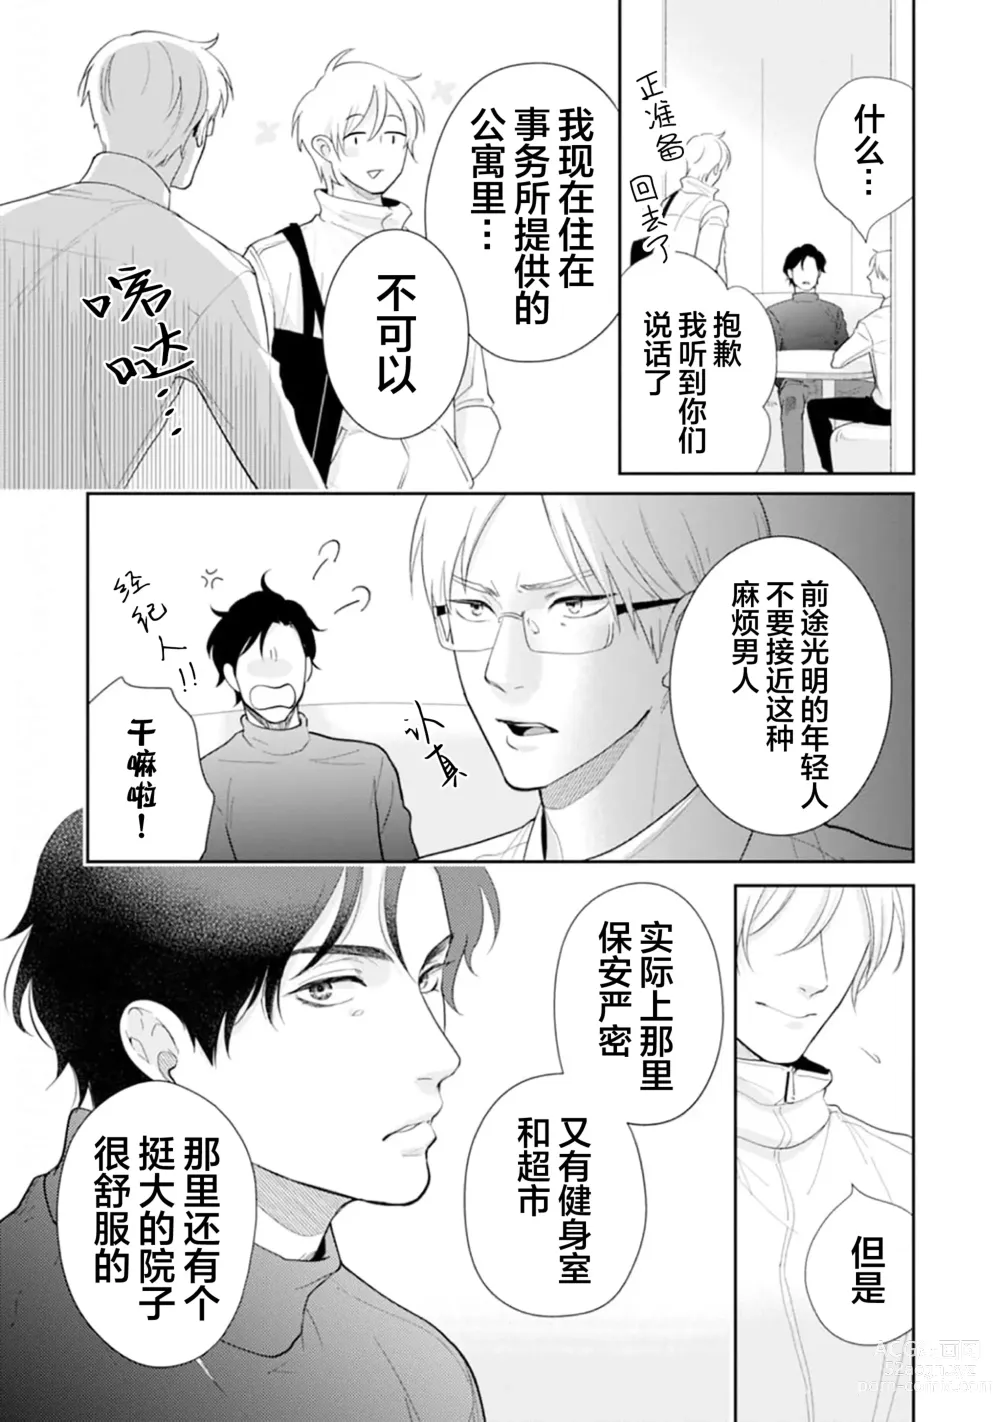 Page 17 of manga Toshiue no hitoーsecond bloomー｜年上之人—second bloom—Chinese]